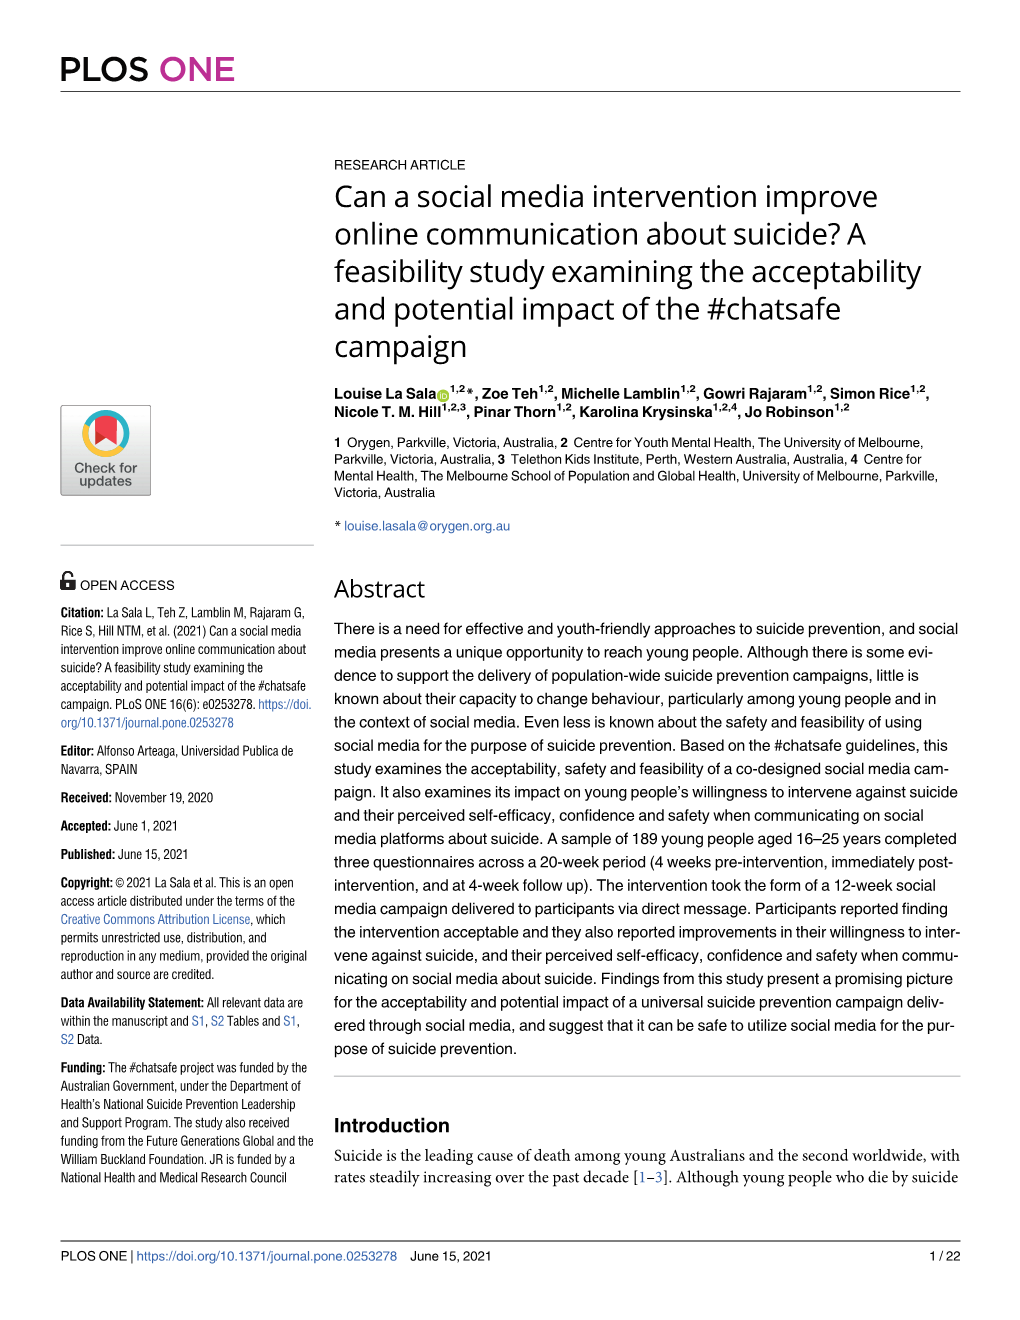 A Feasibility Study Examining the Acceptability and Potential Impact of the #Chatsafe Campaign